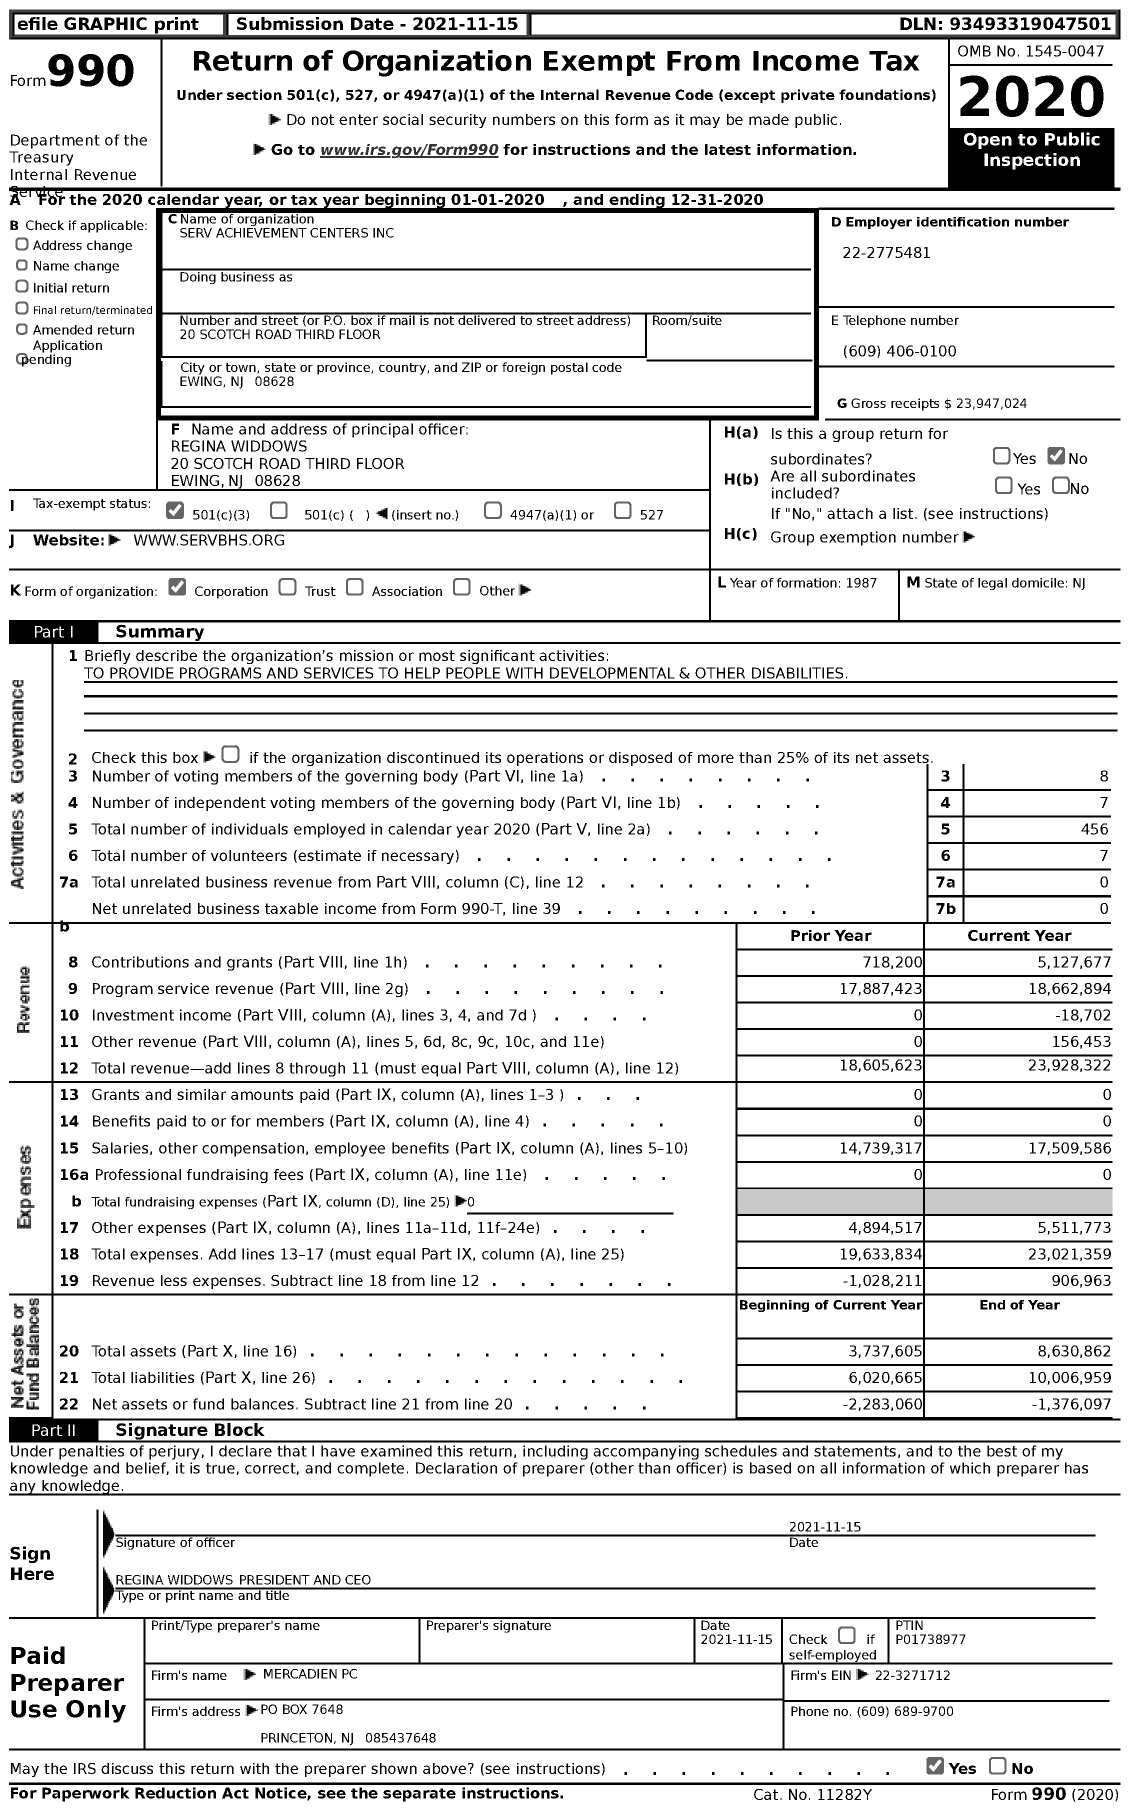 Image of first page of 2020 Form 990 for Serv Achievement Centers